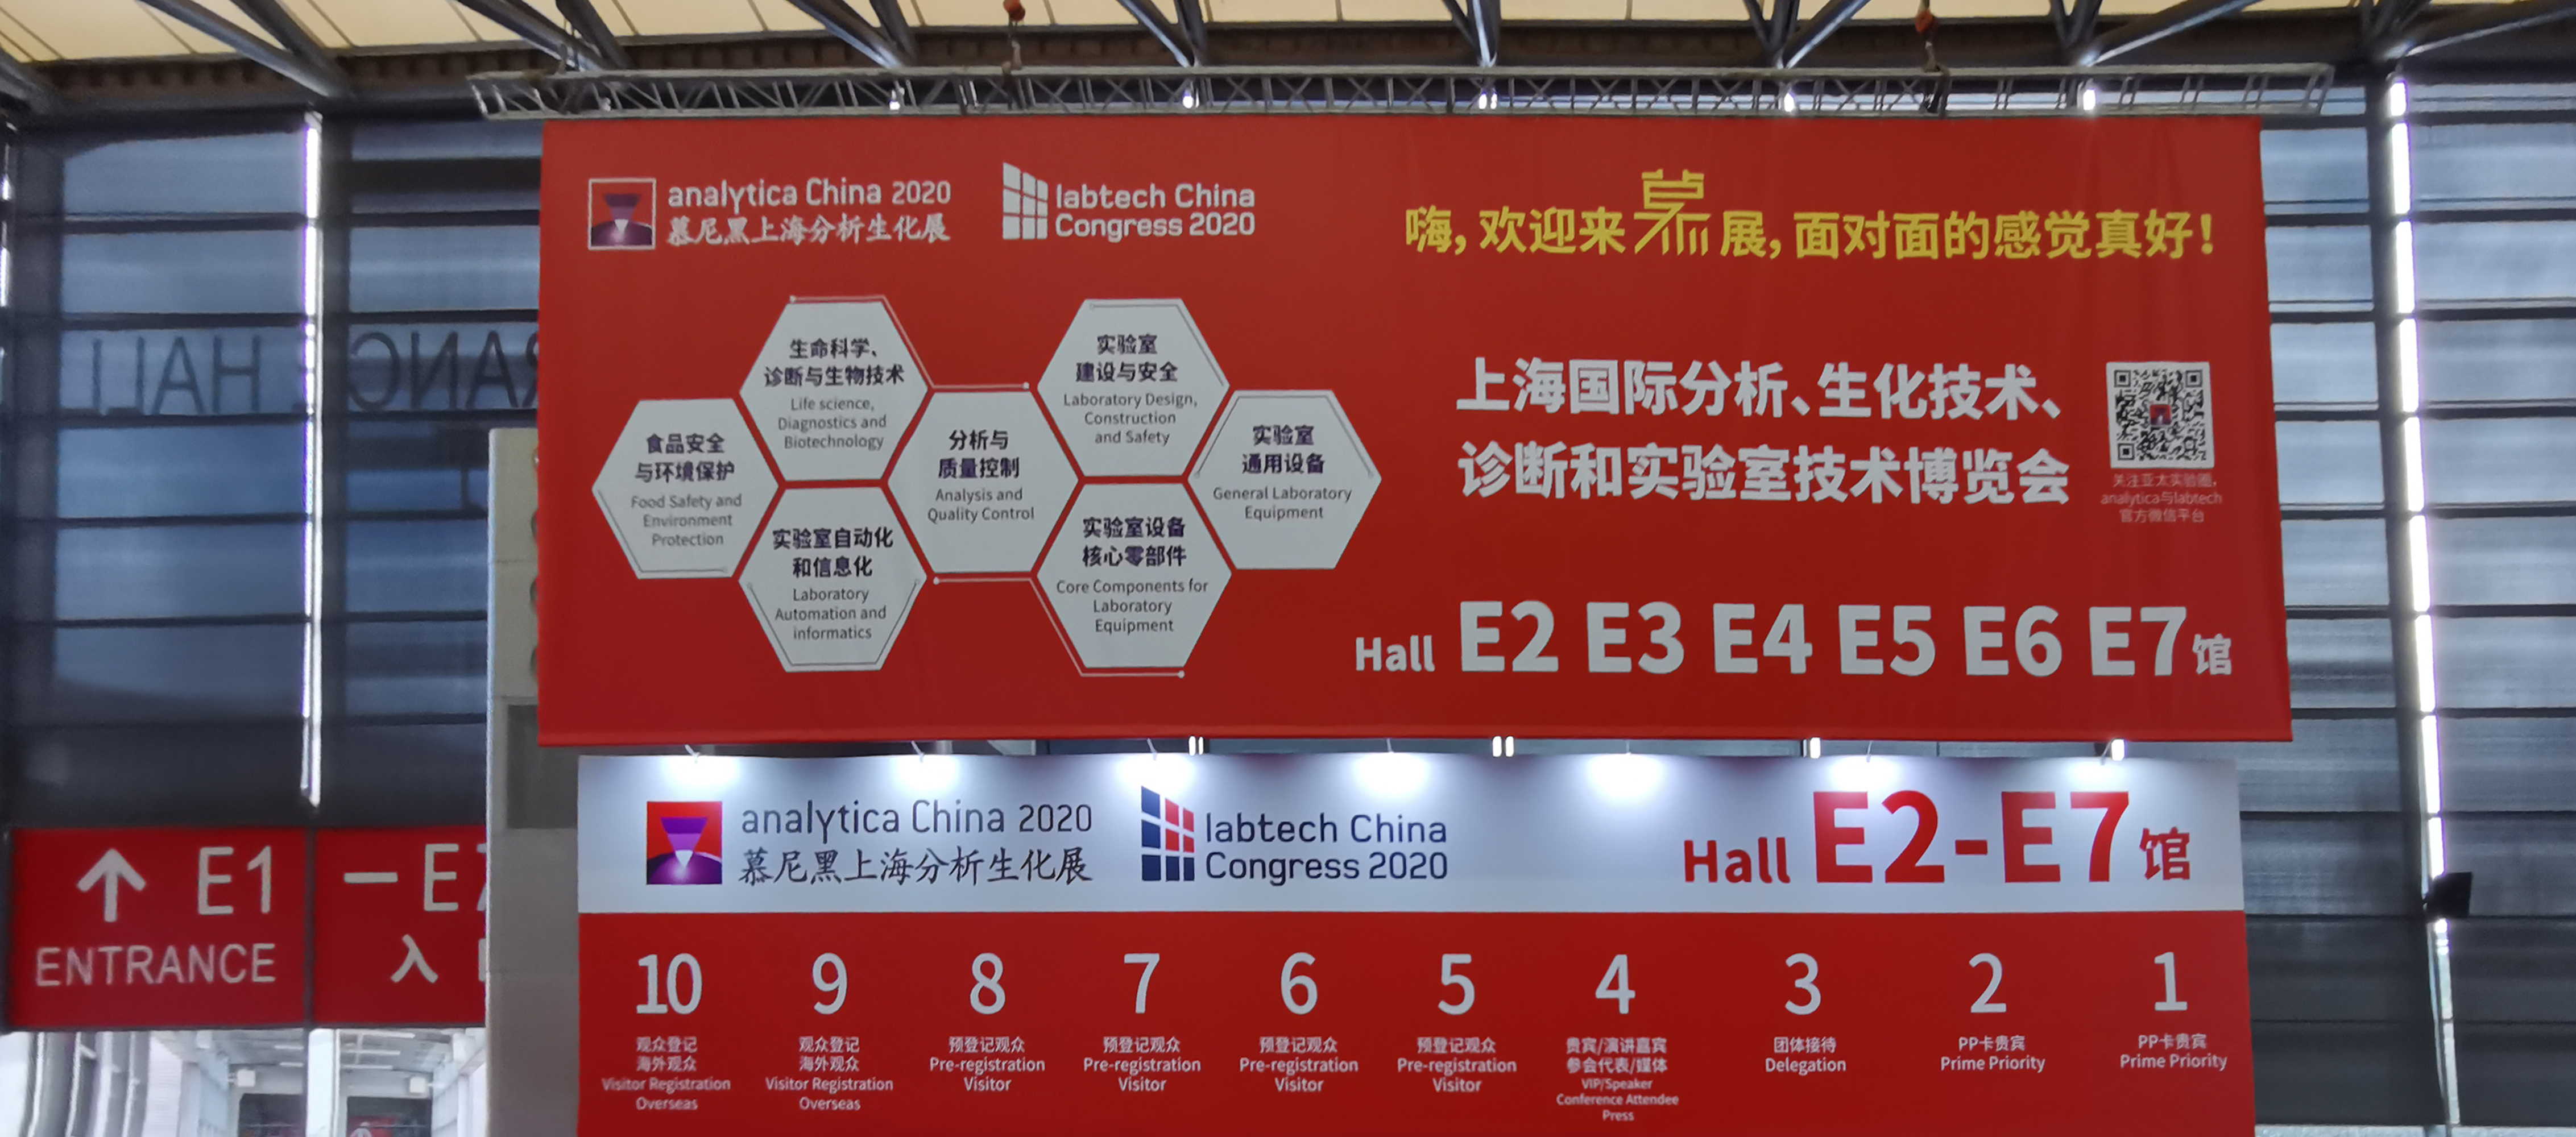 The analytica China had been successfully concluded